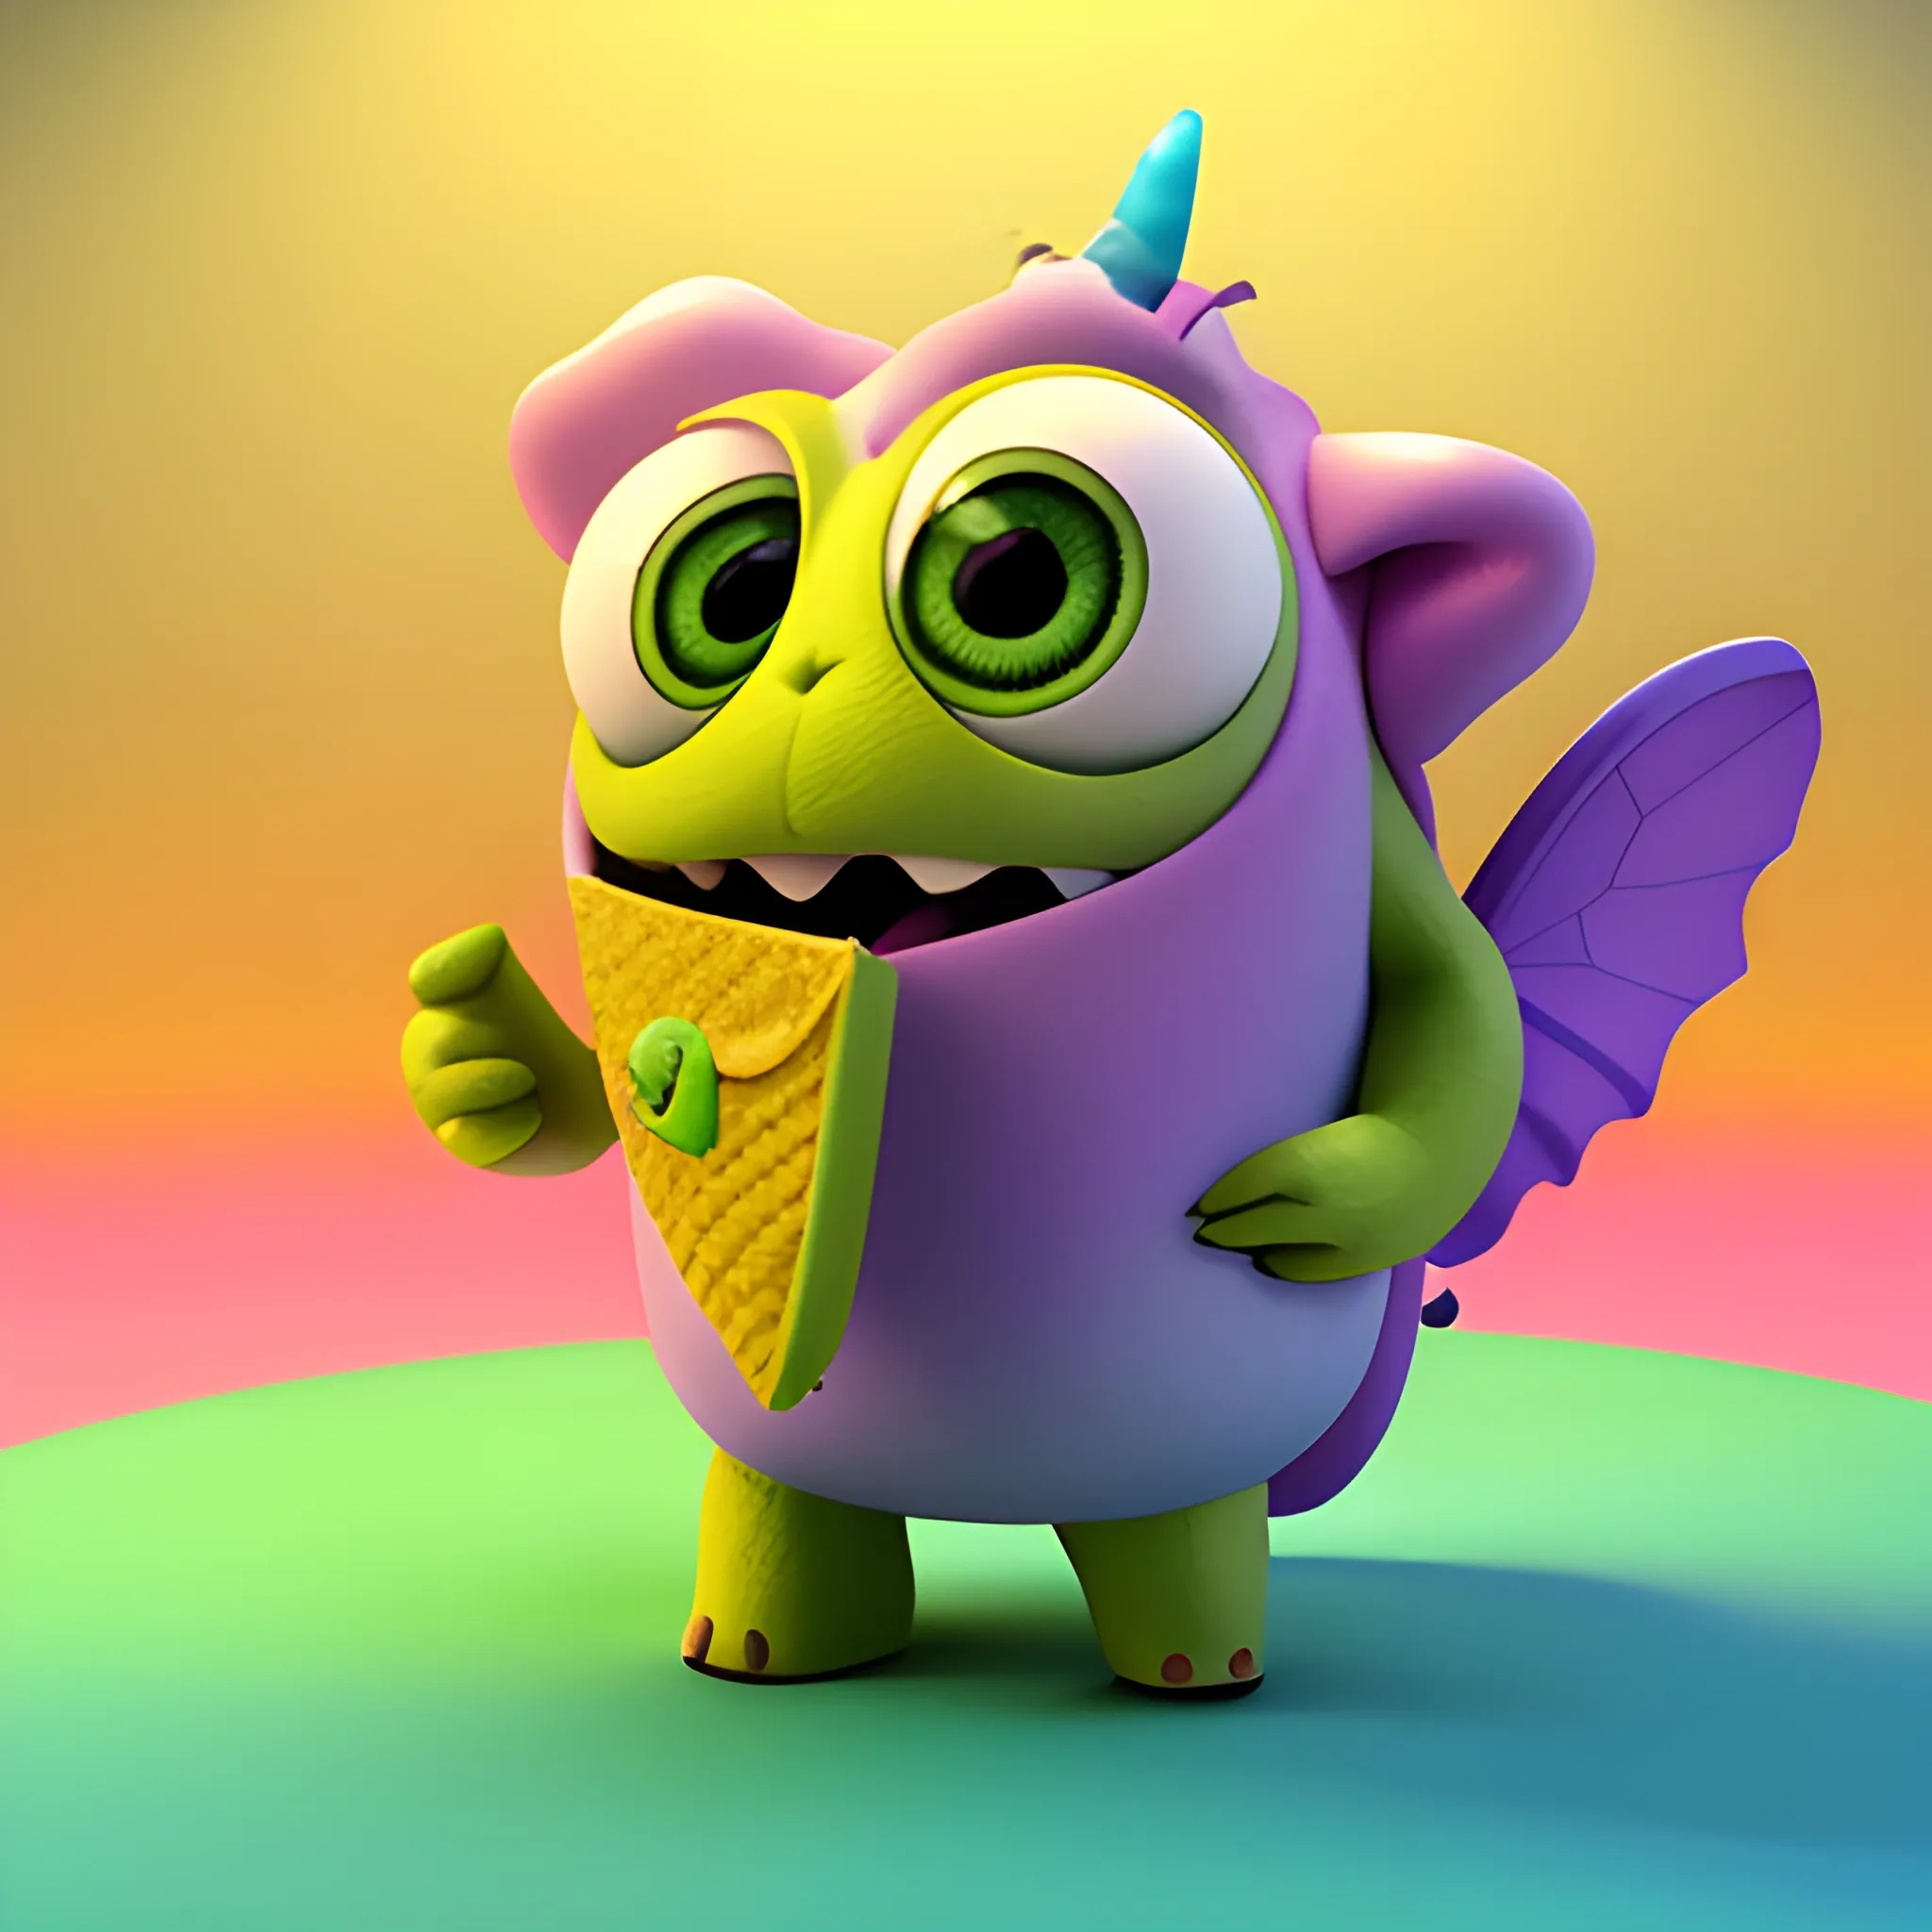 , 3D, Cartoon, Cute light lime Monster baby elefant, plush shaggy  body, with colorful butterfly wings on the bag, eating  pallete ice cream coffee with higs, 3D, Hk , kwaii, like monster inc of pixar style, two saturate light filter color